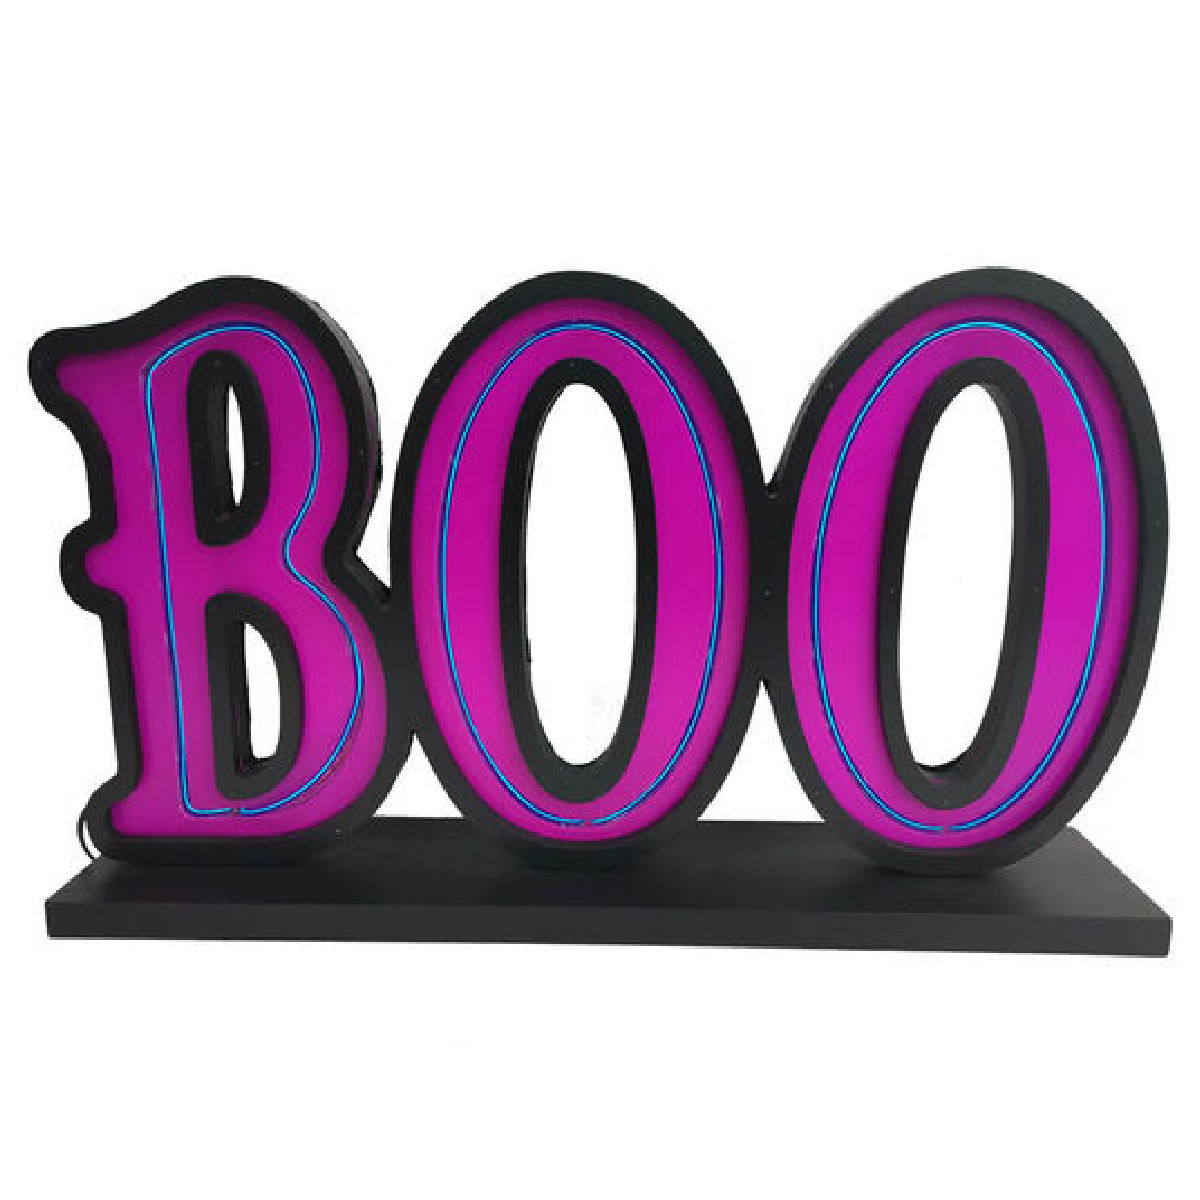 Place & Time Halloween LED Boo Tabletop Decor